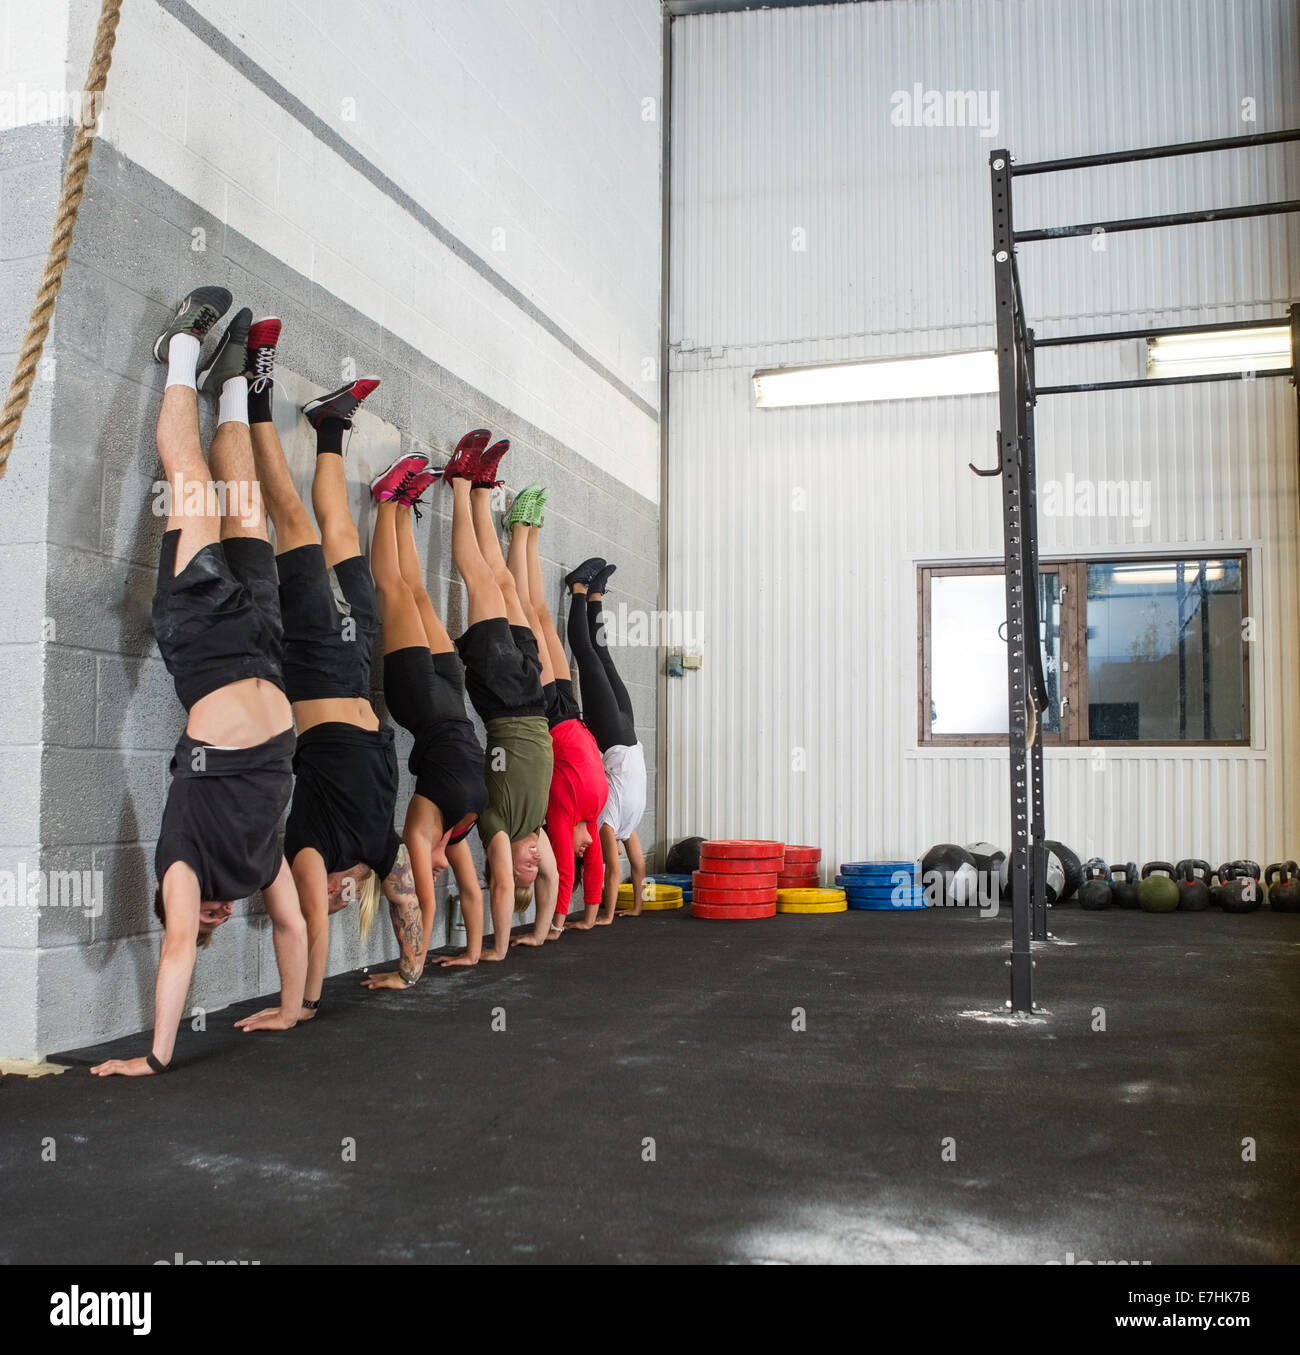 People Doing Handstands At Cross Training Box Stock Photo